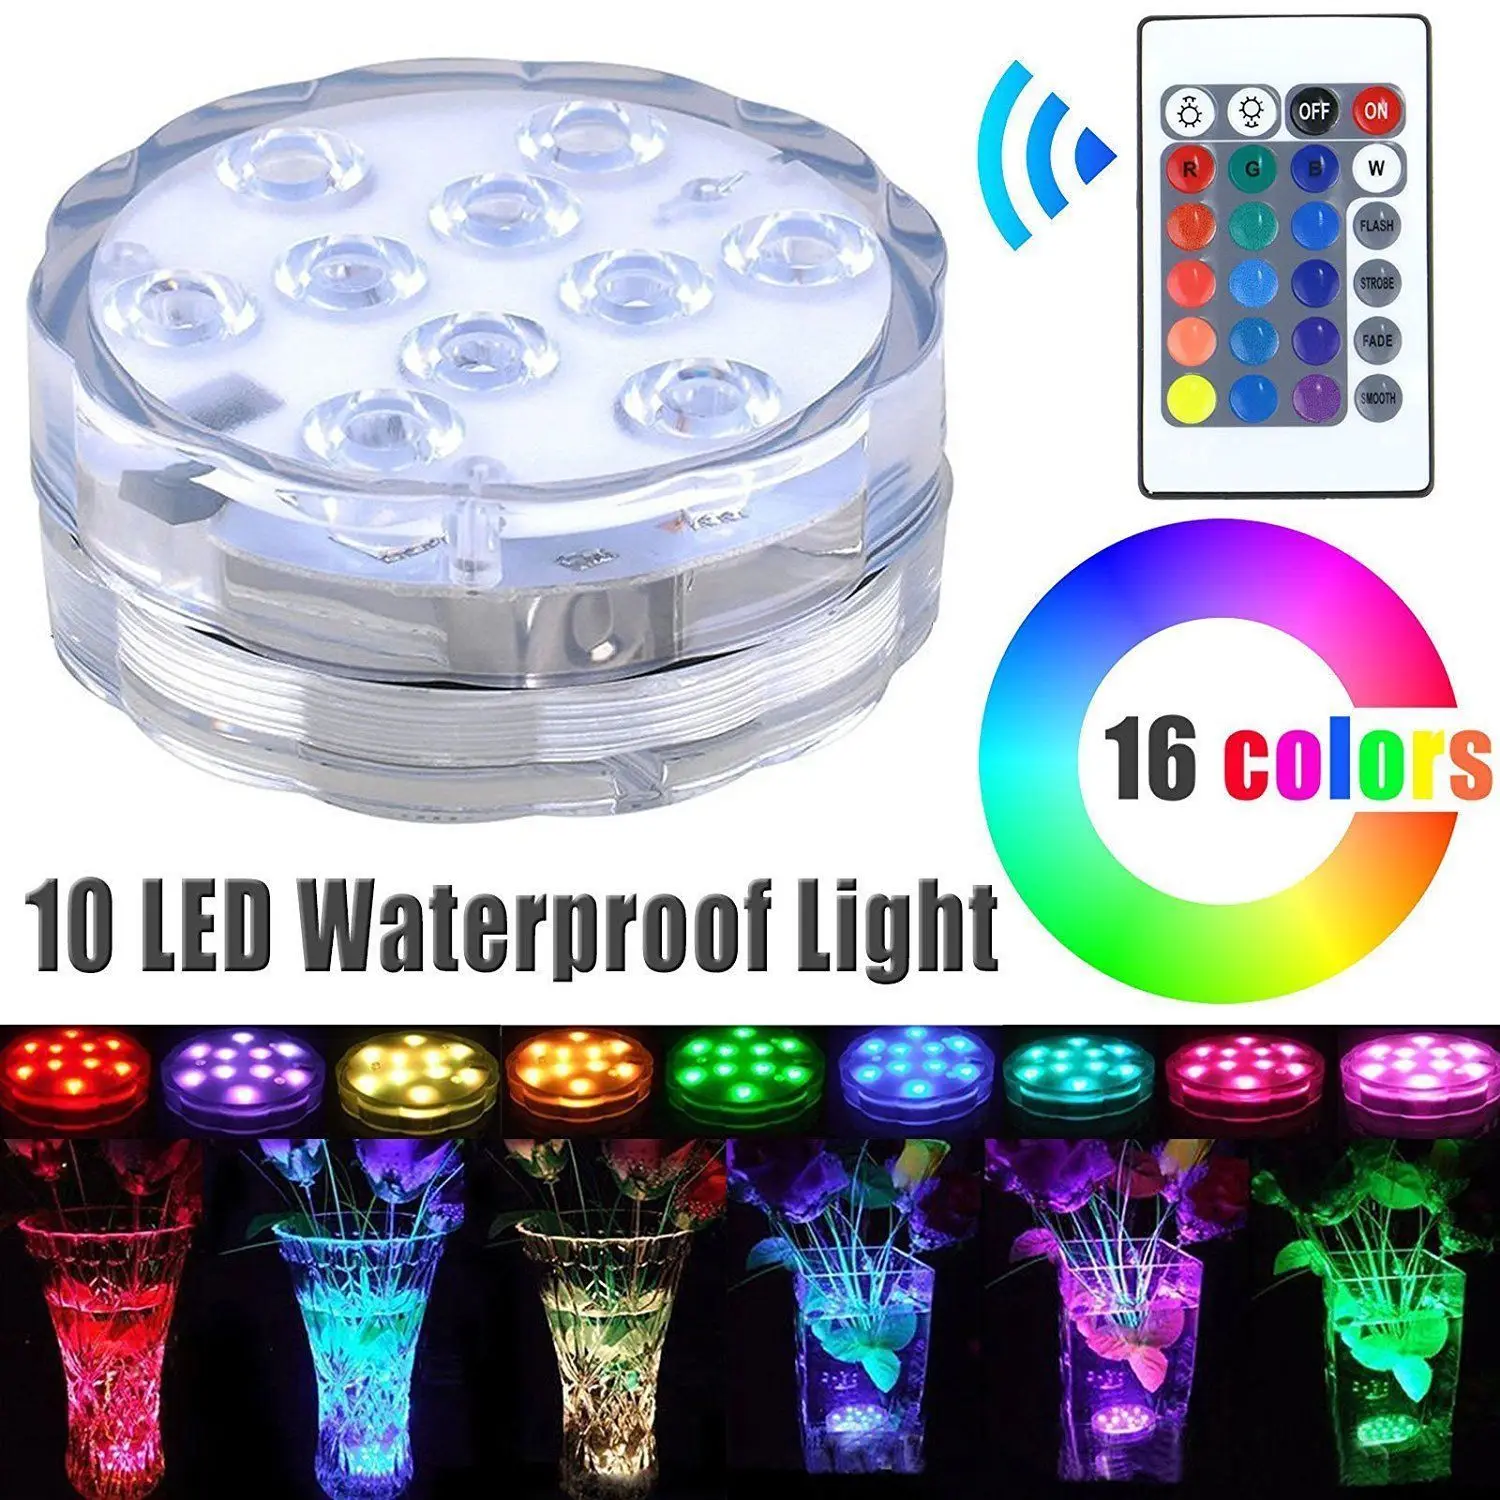 

10leds RGB Underwater Submersible Led Light Waterproof Battery Operated Pond Swimming Pool Light For Vase Base,Floral,Aquarium